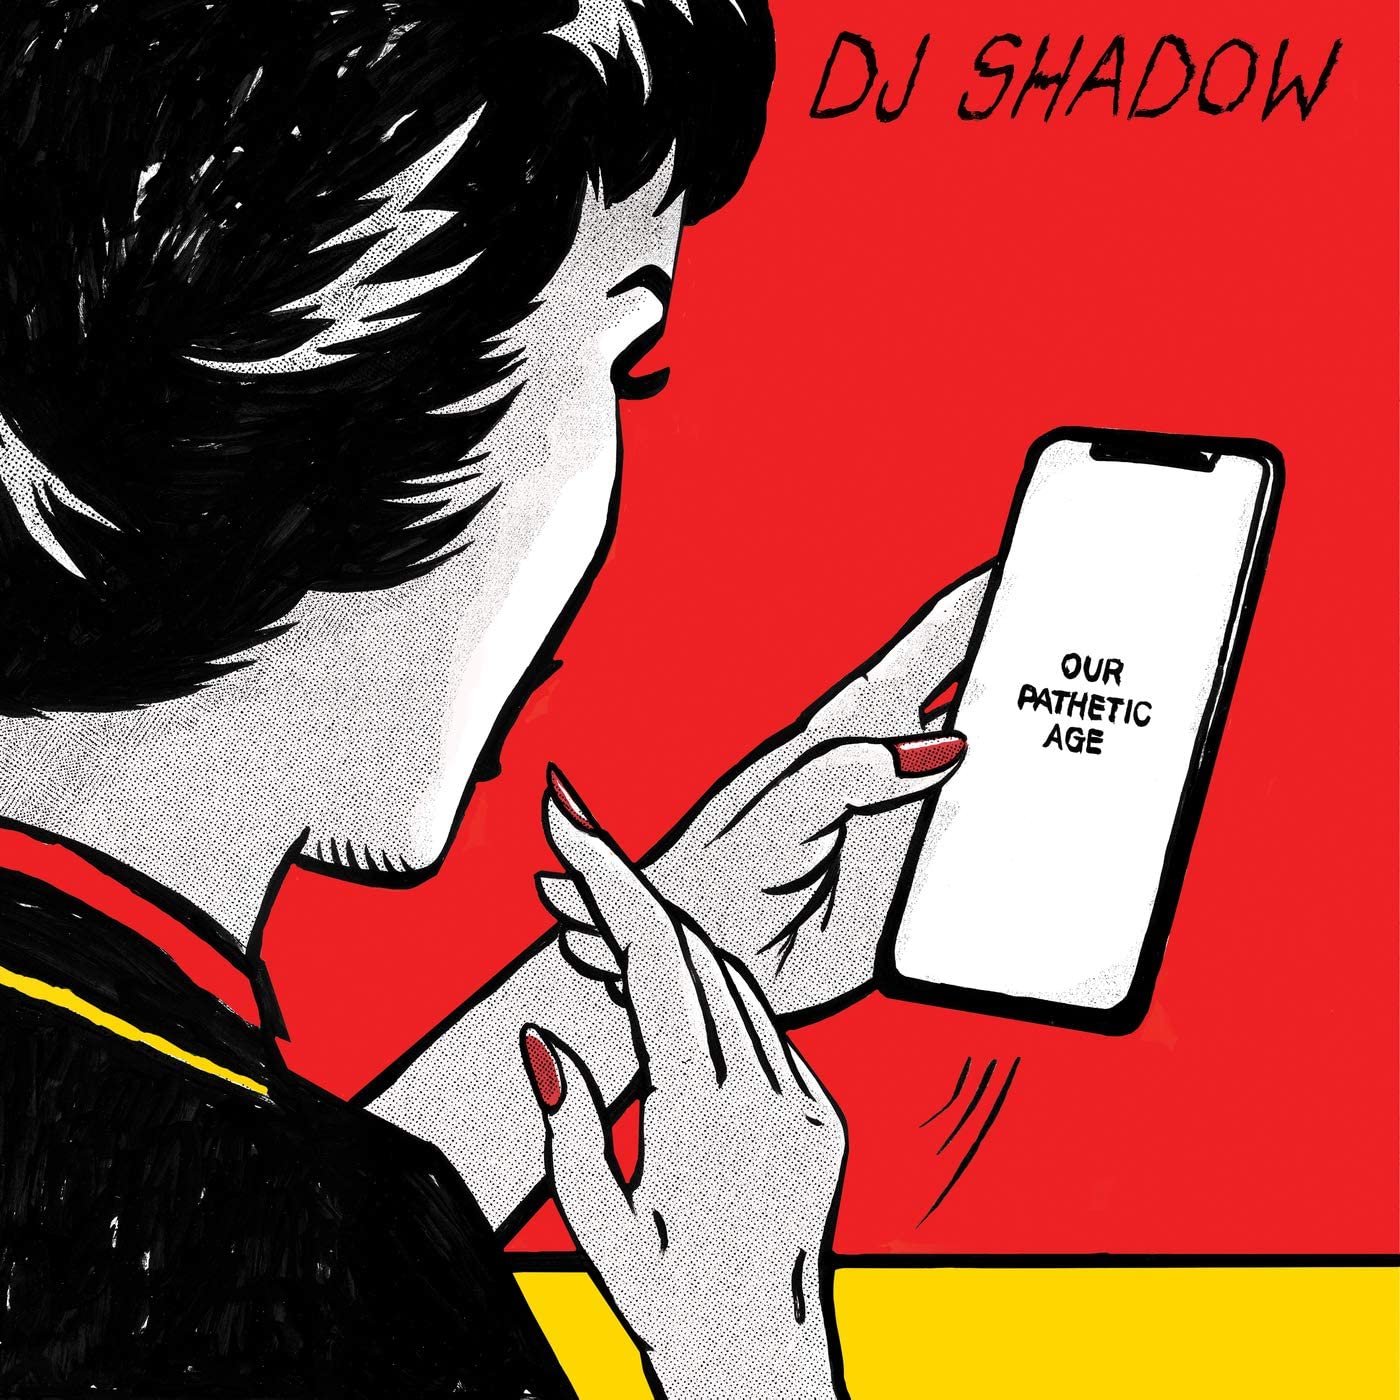 DJ Shadow/Our Pathetic Age [LP]